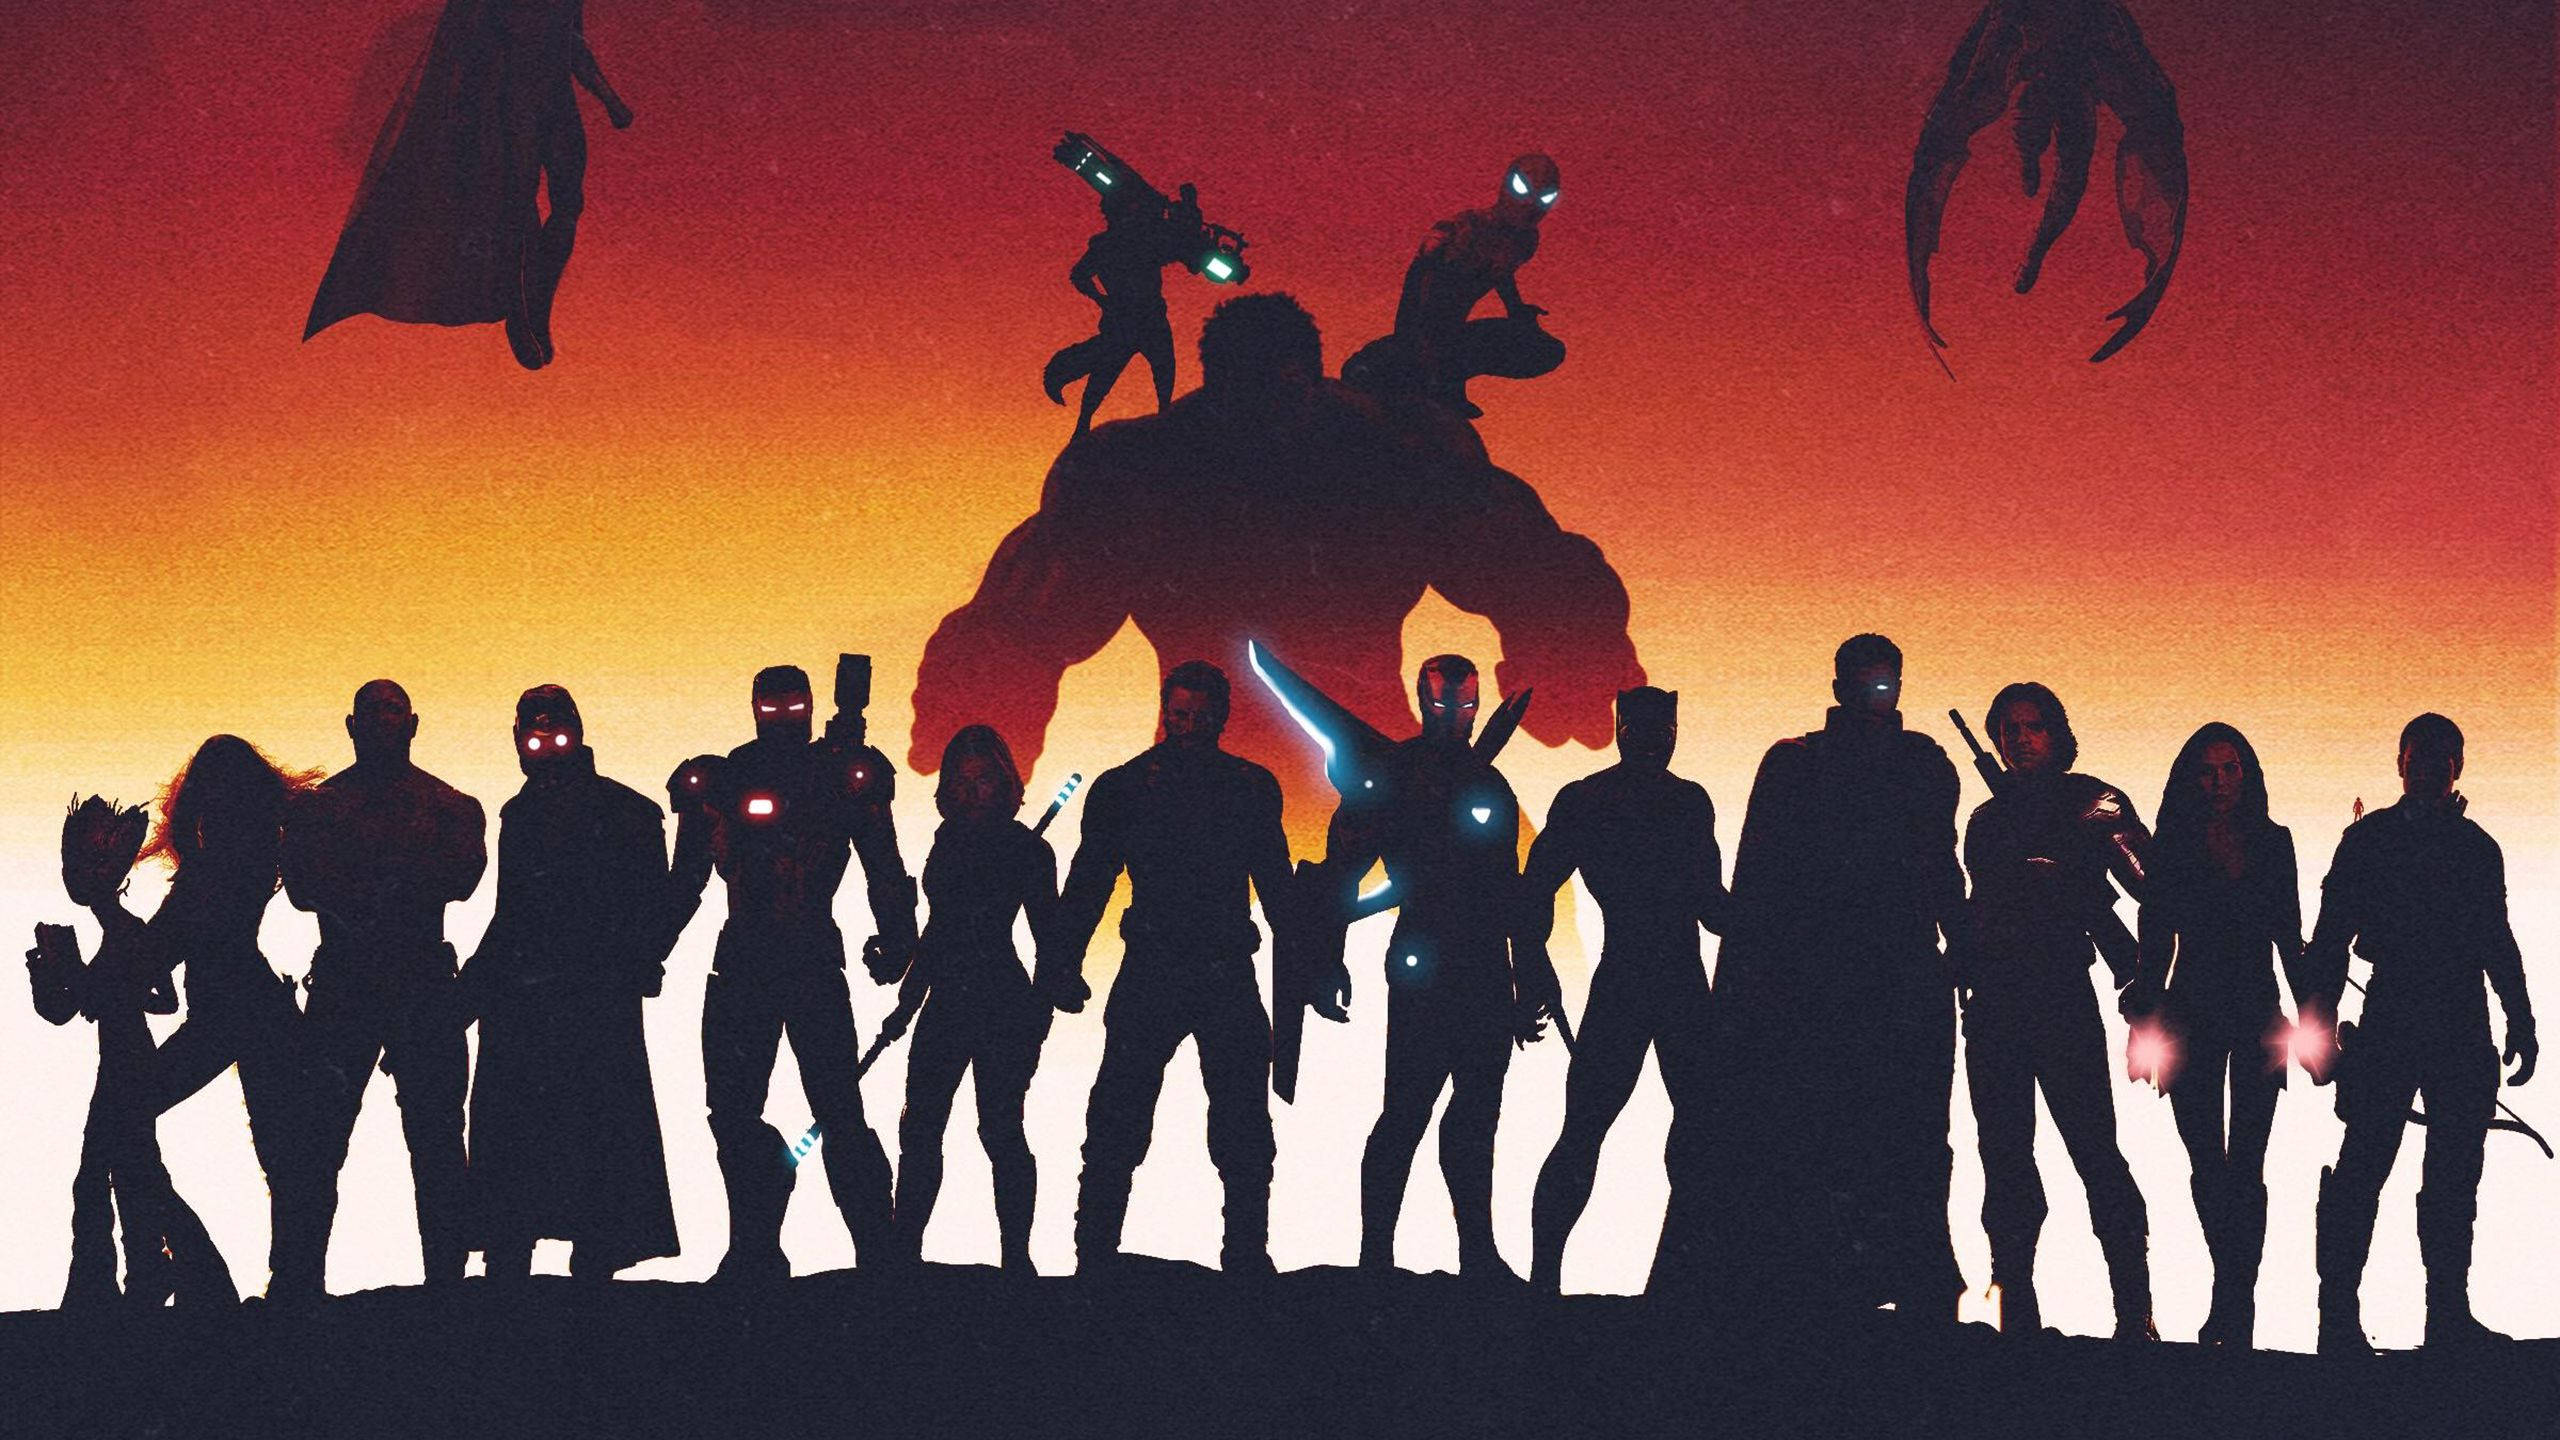 2560x1440 Marvel Heroes Silhouettes Background